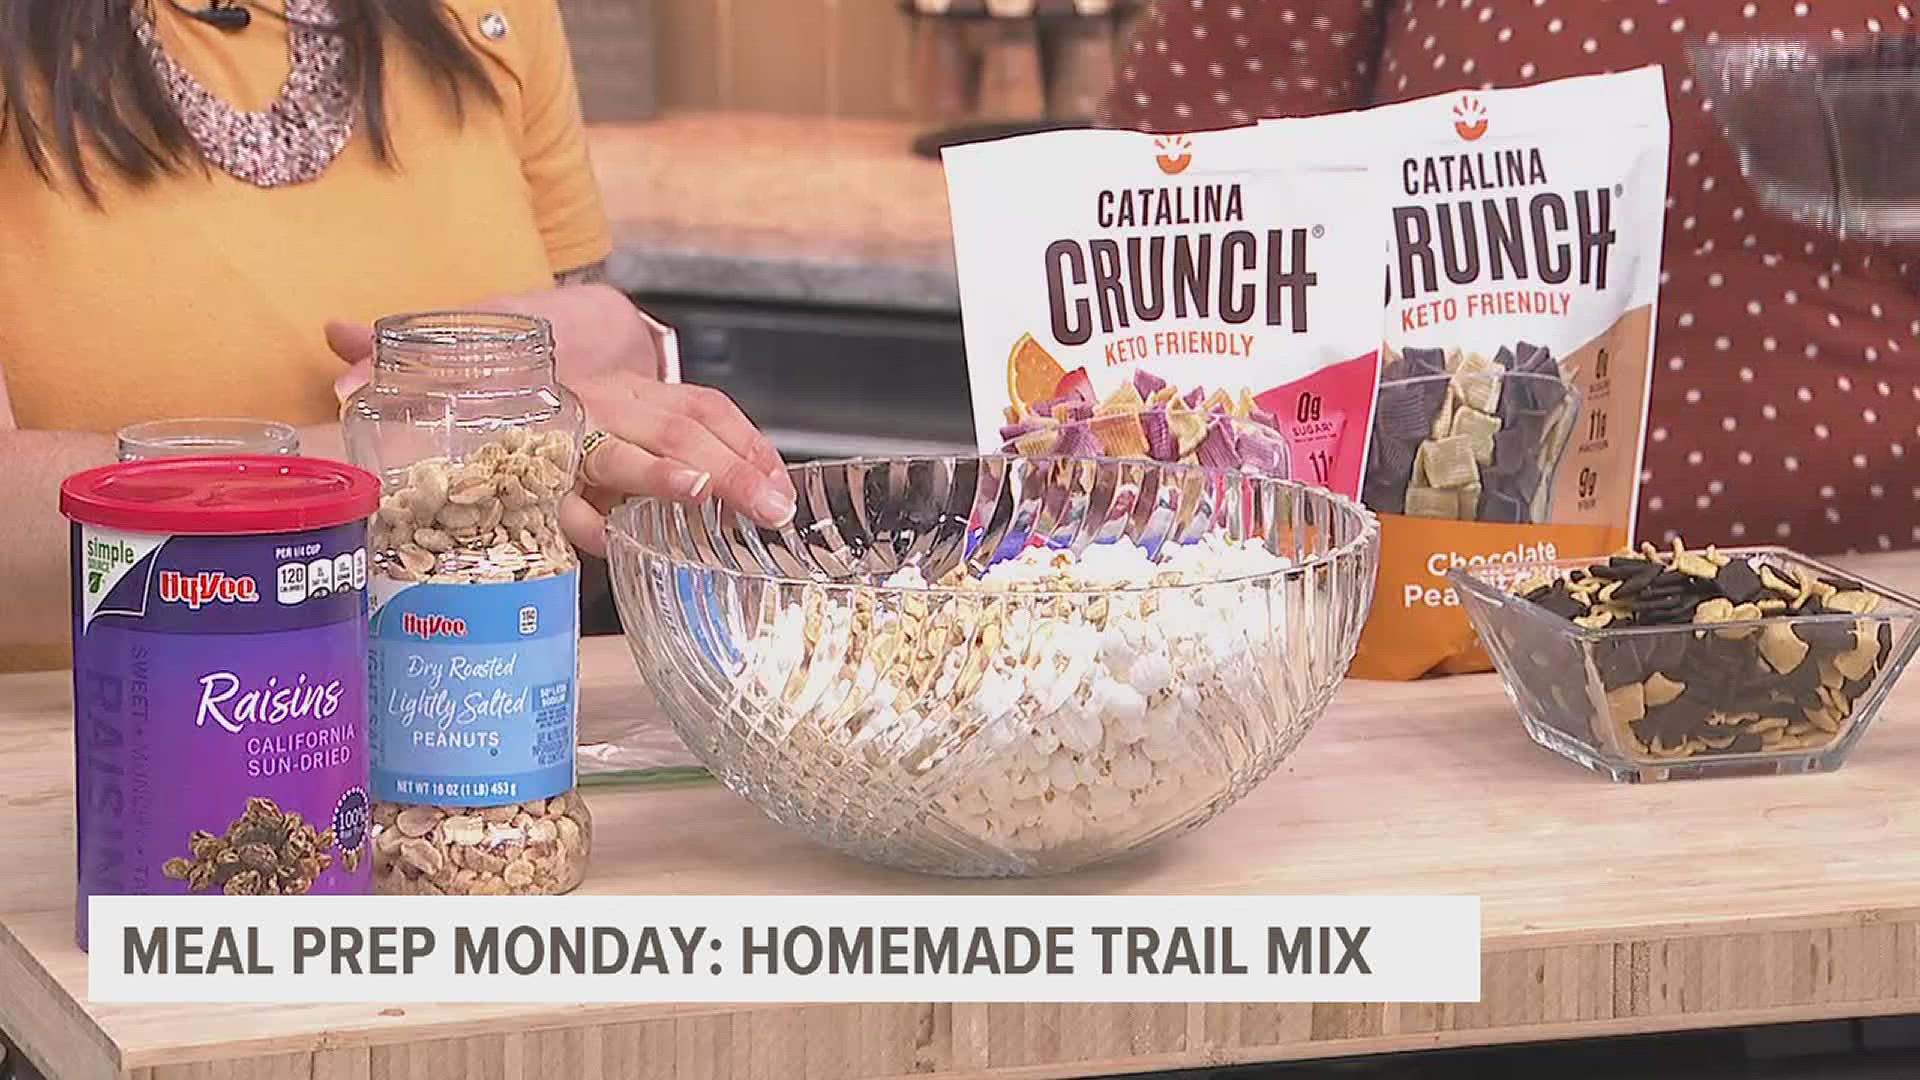 Here's how you can put together a healthy trail mix that's good for the family and even better for travelers.